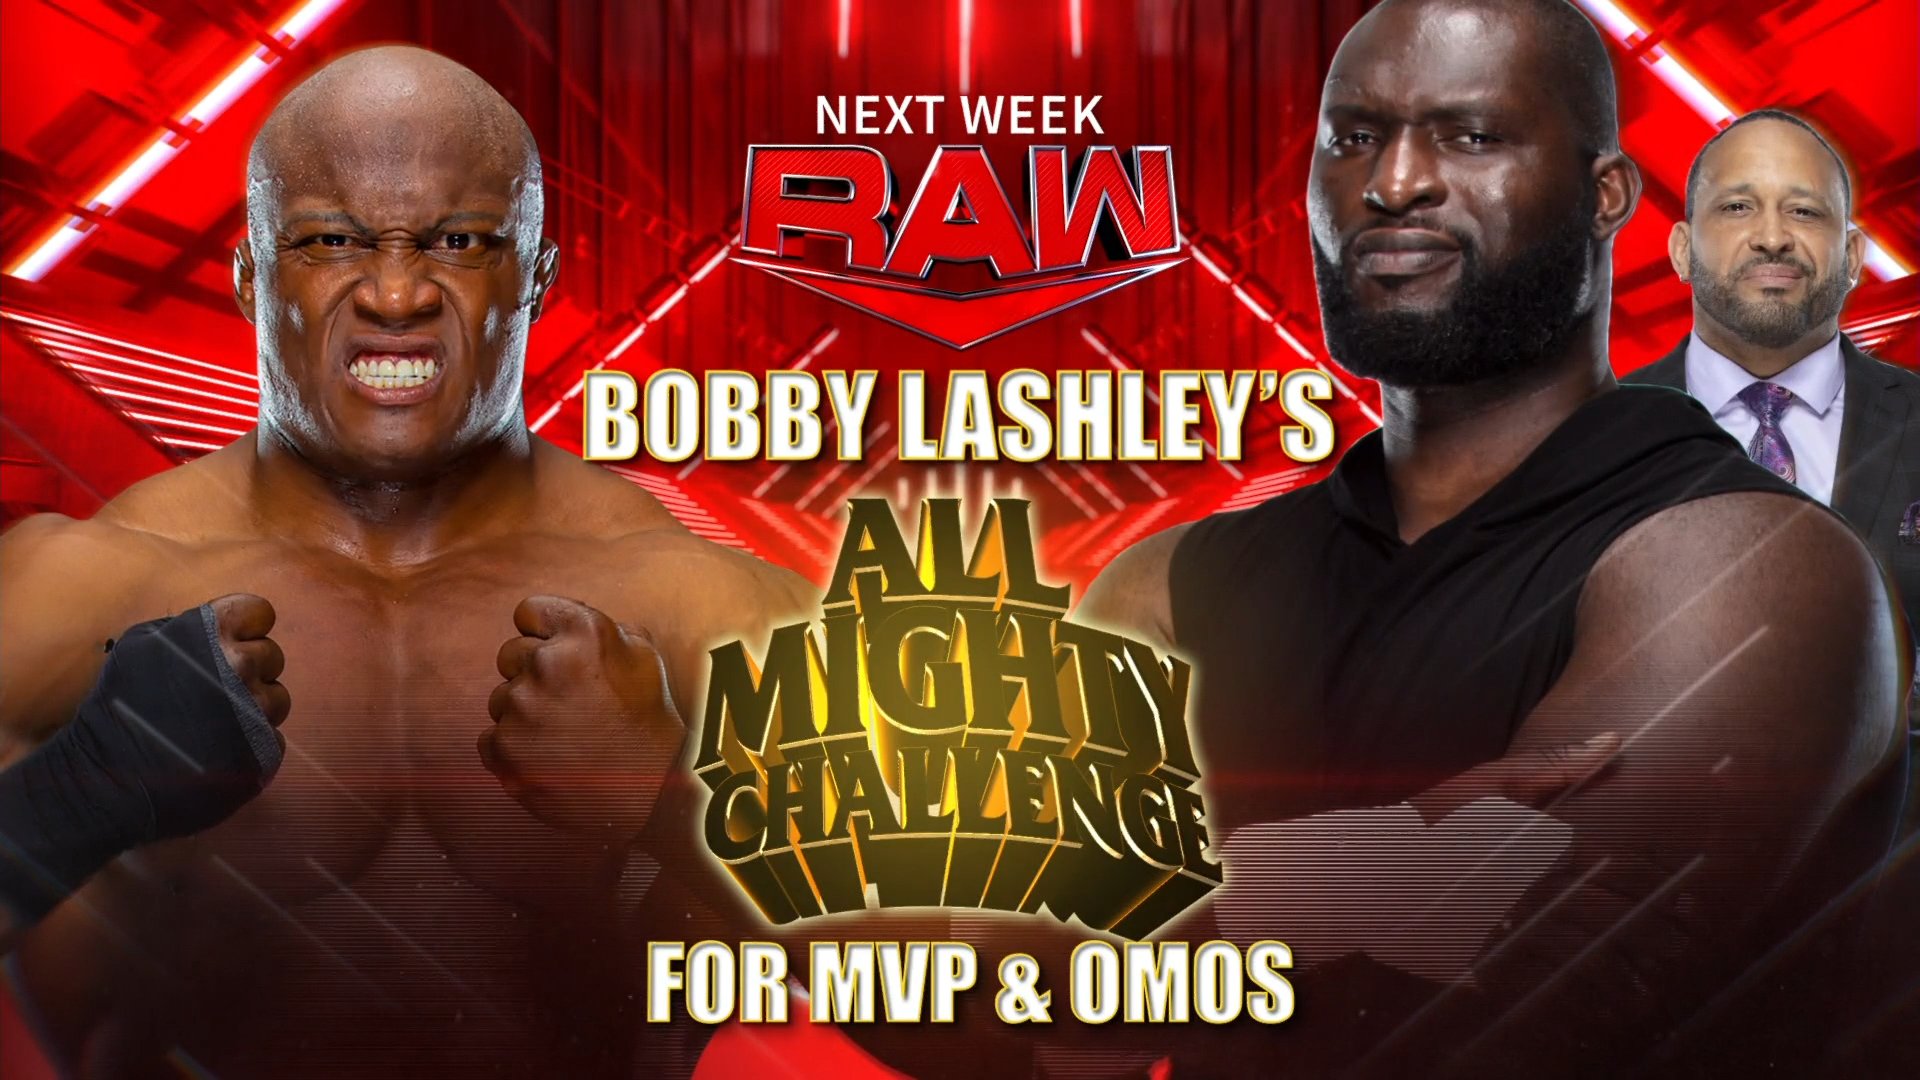 WWE Raw Next Week: Omos and MVP to face Bobby Lashley's All Mighty Challenge